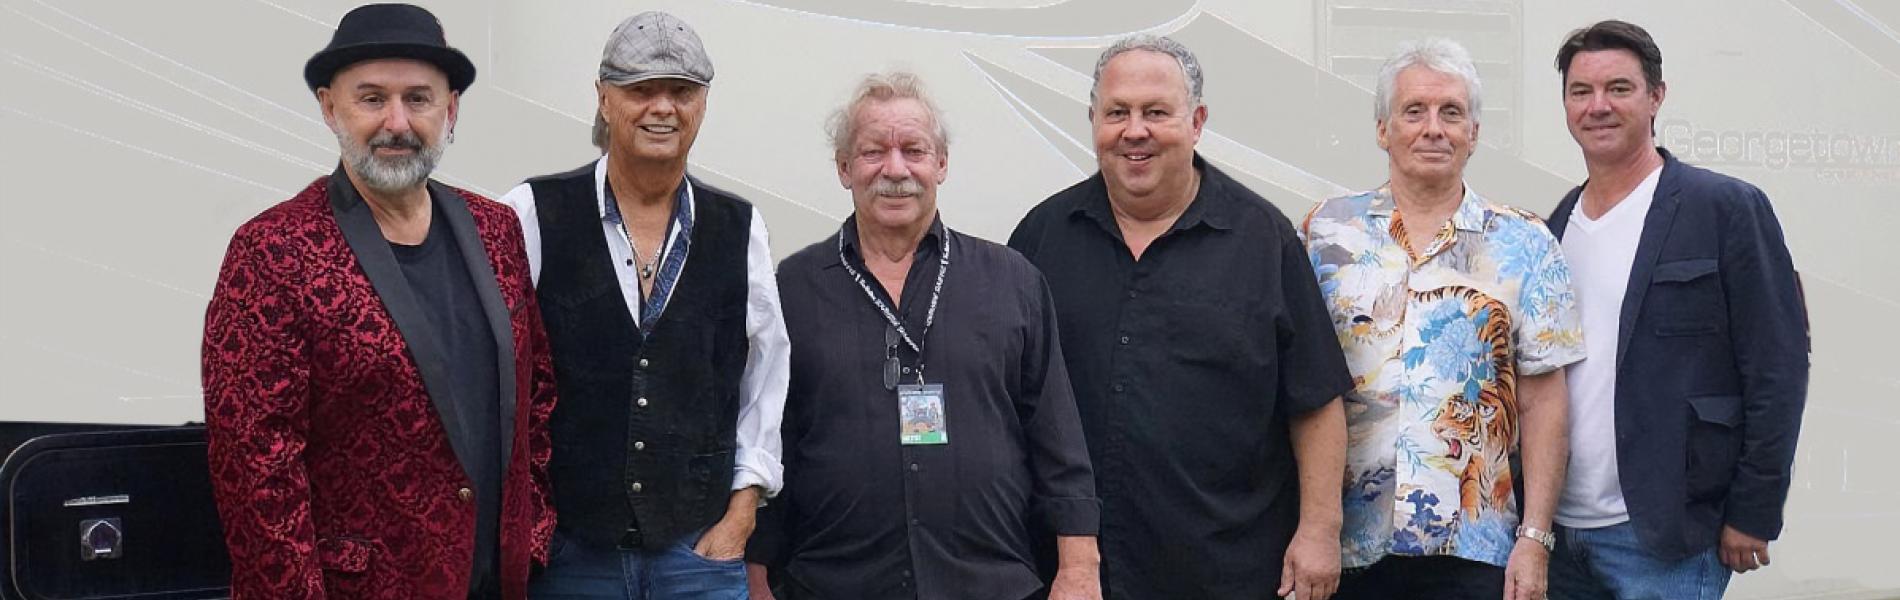 Group picture of Downchild Blues Band